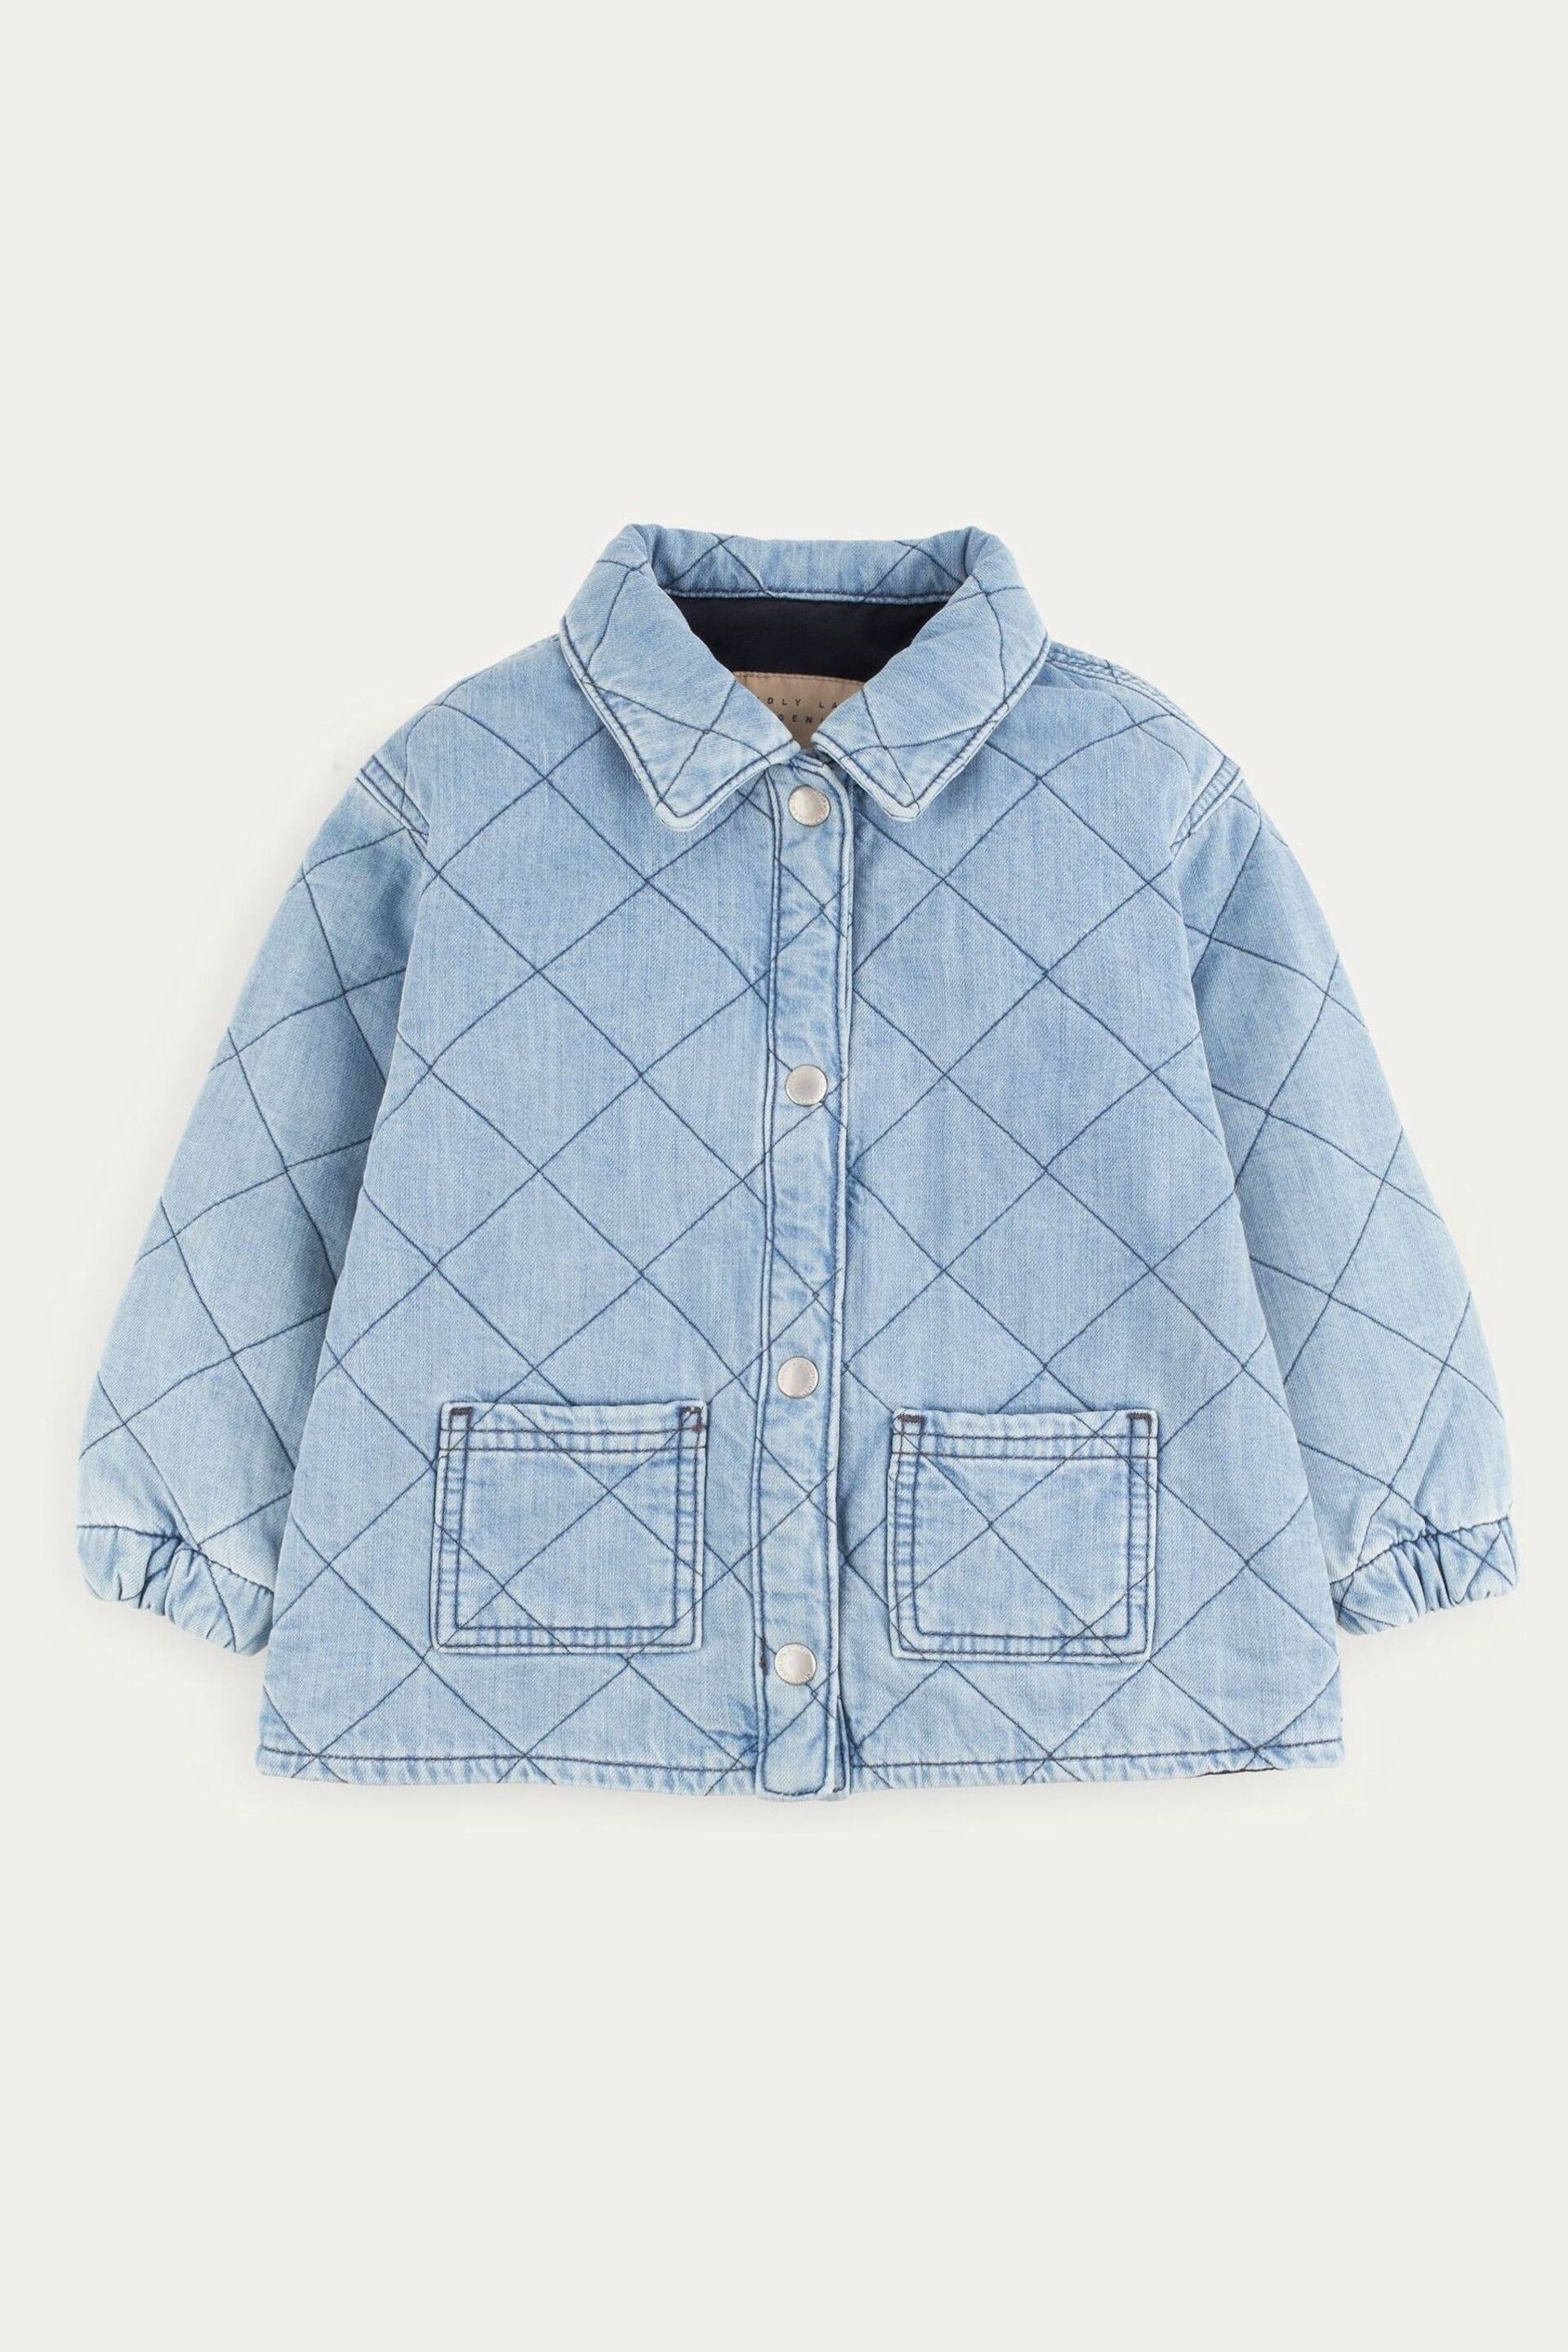 KIDLY Blue Quilted Shacket - Image 1 of 5